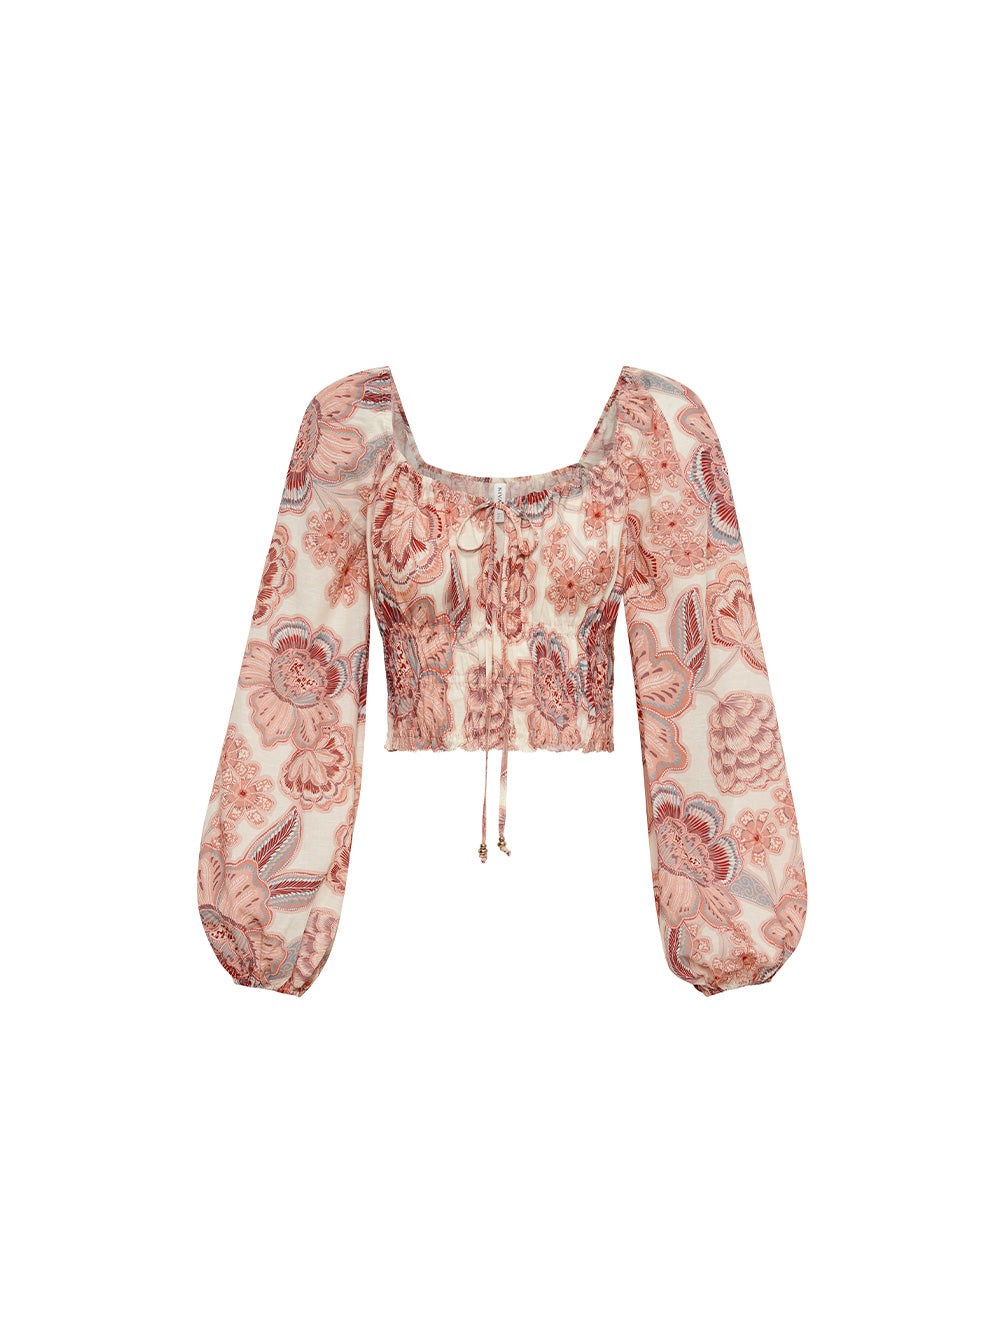 Ghost image of KIVARI Maya Crop Top: A pink and red floral on a natural base featuring an elasticated neckline, full-length blouson sleeves and a shirred bodice.